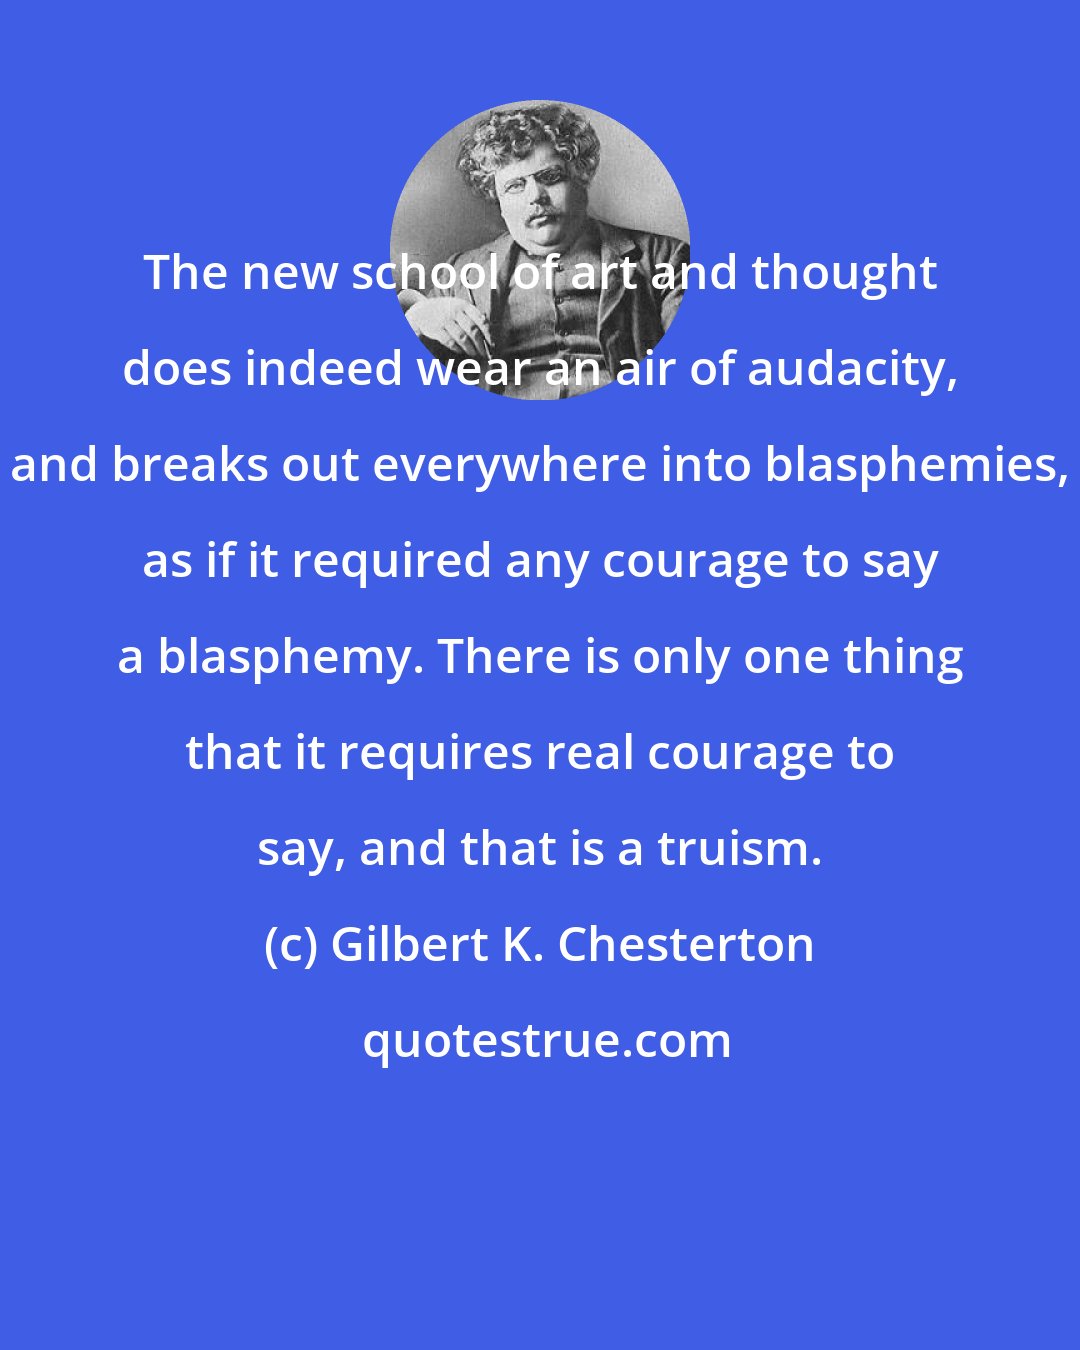 Gilbert K. Chesterton: The new school of art and thought does indeed wear an air of audacity, and breaks out everywhere into blasphemies, as if it required any courage to say a blasphemy. There is only one thing that it requires real courage to say, and that is a truism.